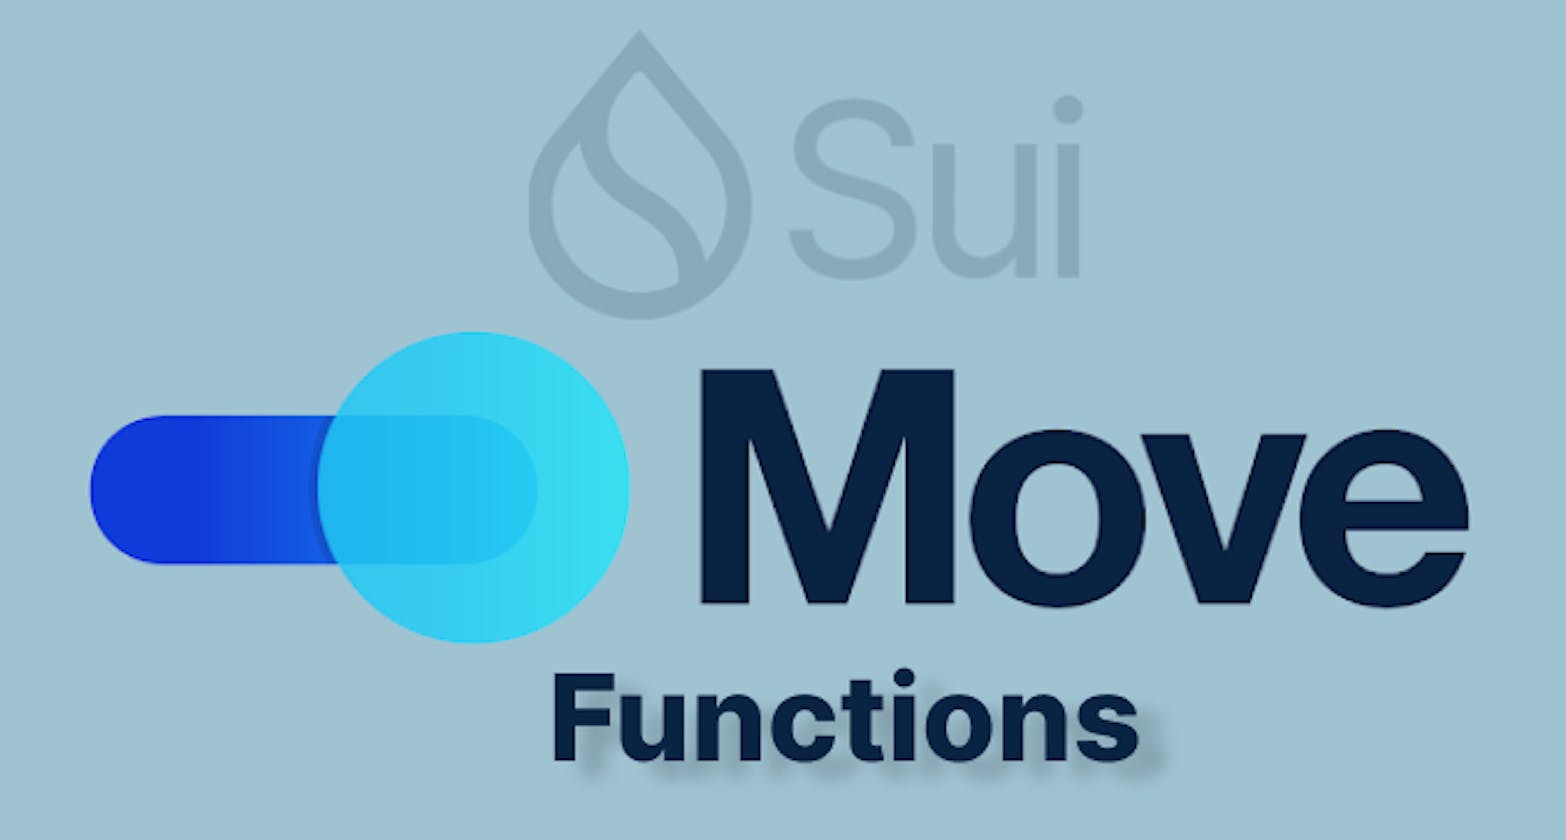 Sui Move language - Functions